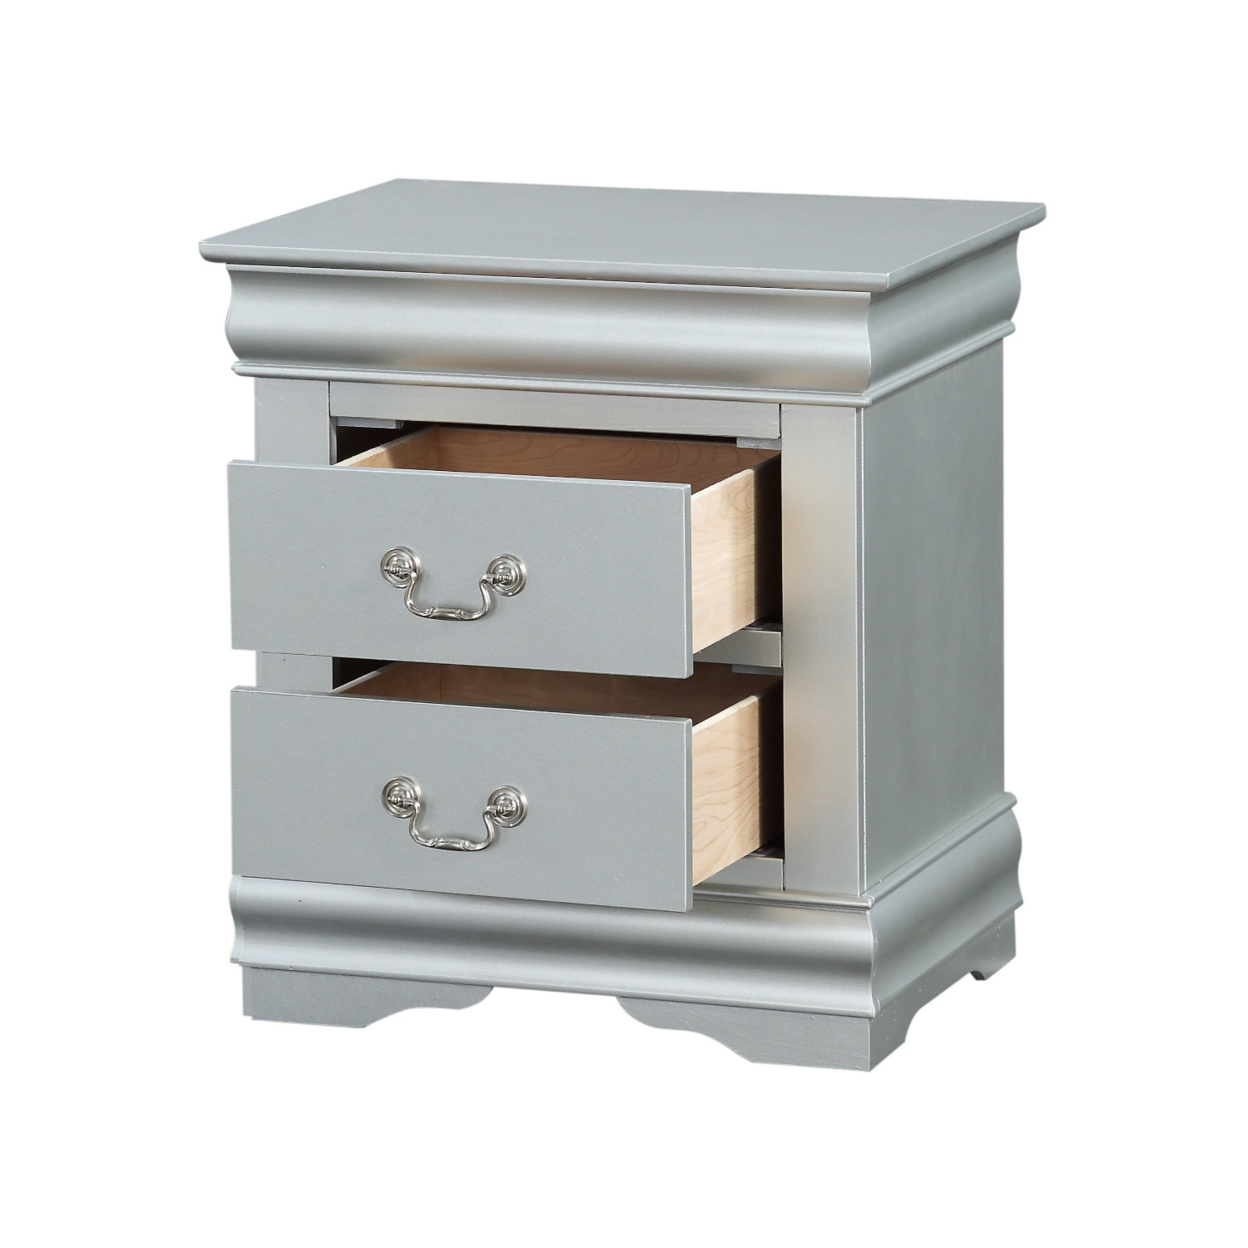 Traditional Style Wooden Nightstand With Two Drawers And Bracket Base, Gray- Saltoro Sherpi